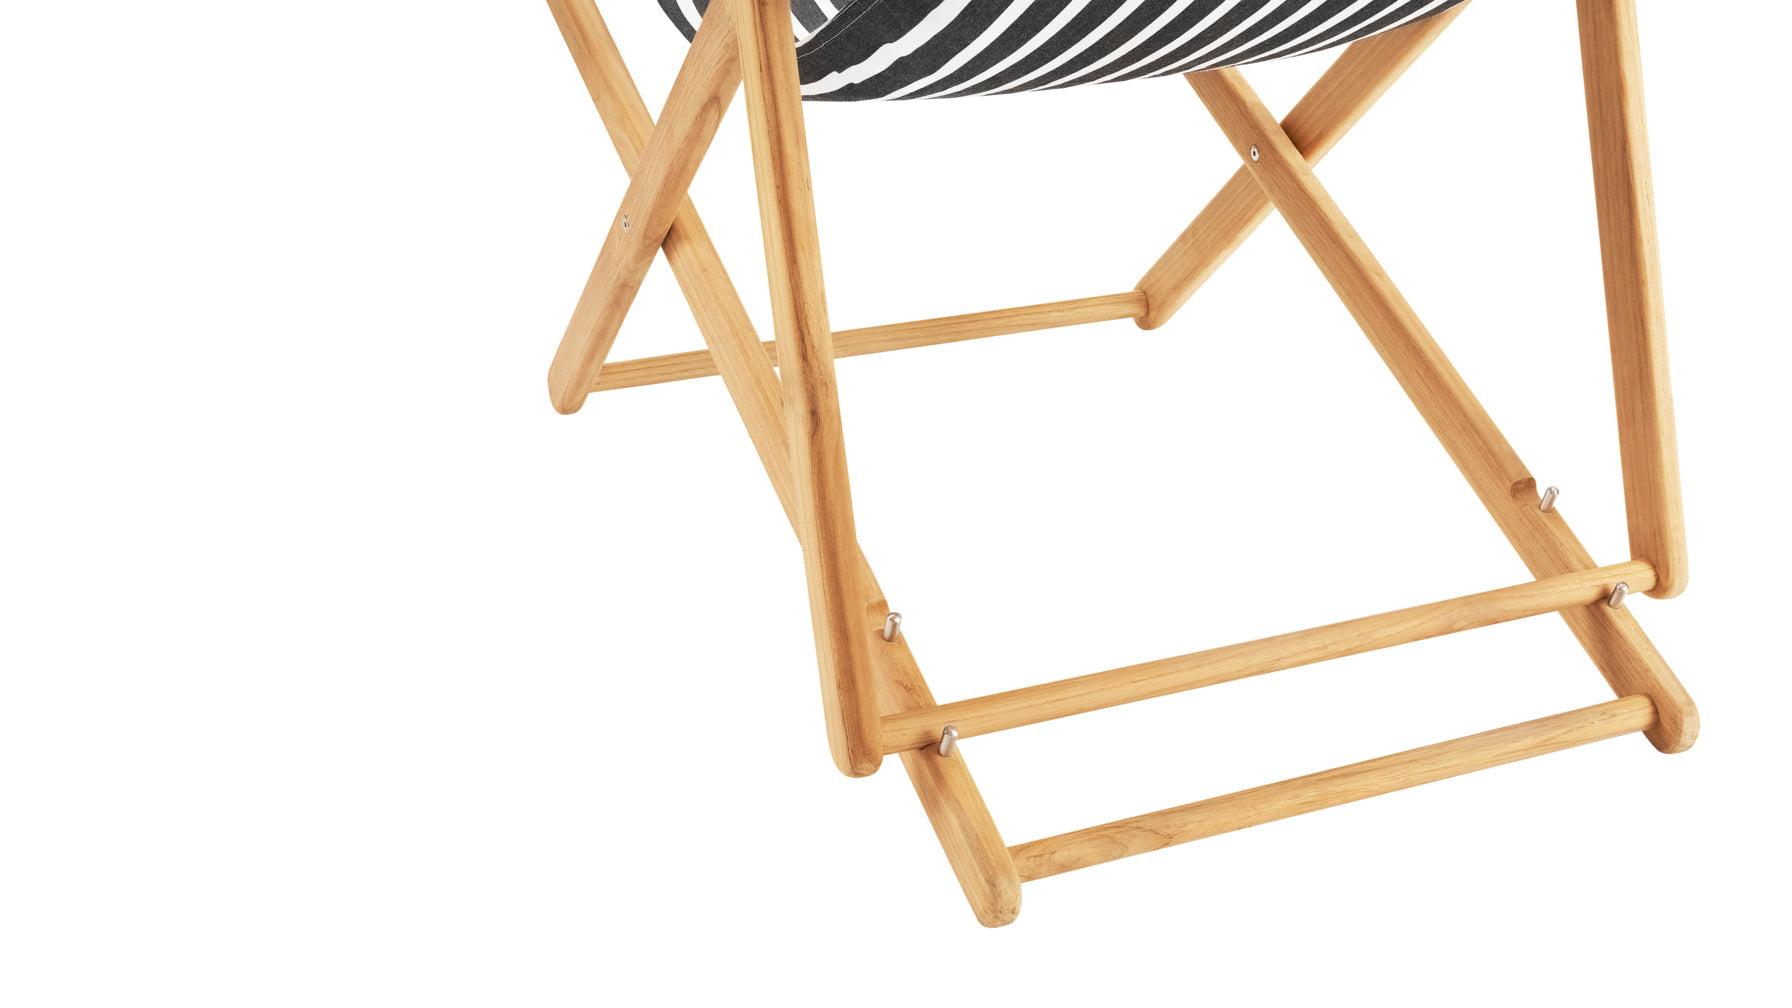 Settle In Outdoor Deck Chair, Black Sand - Image 10